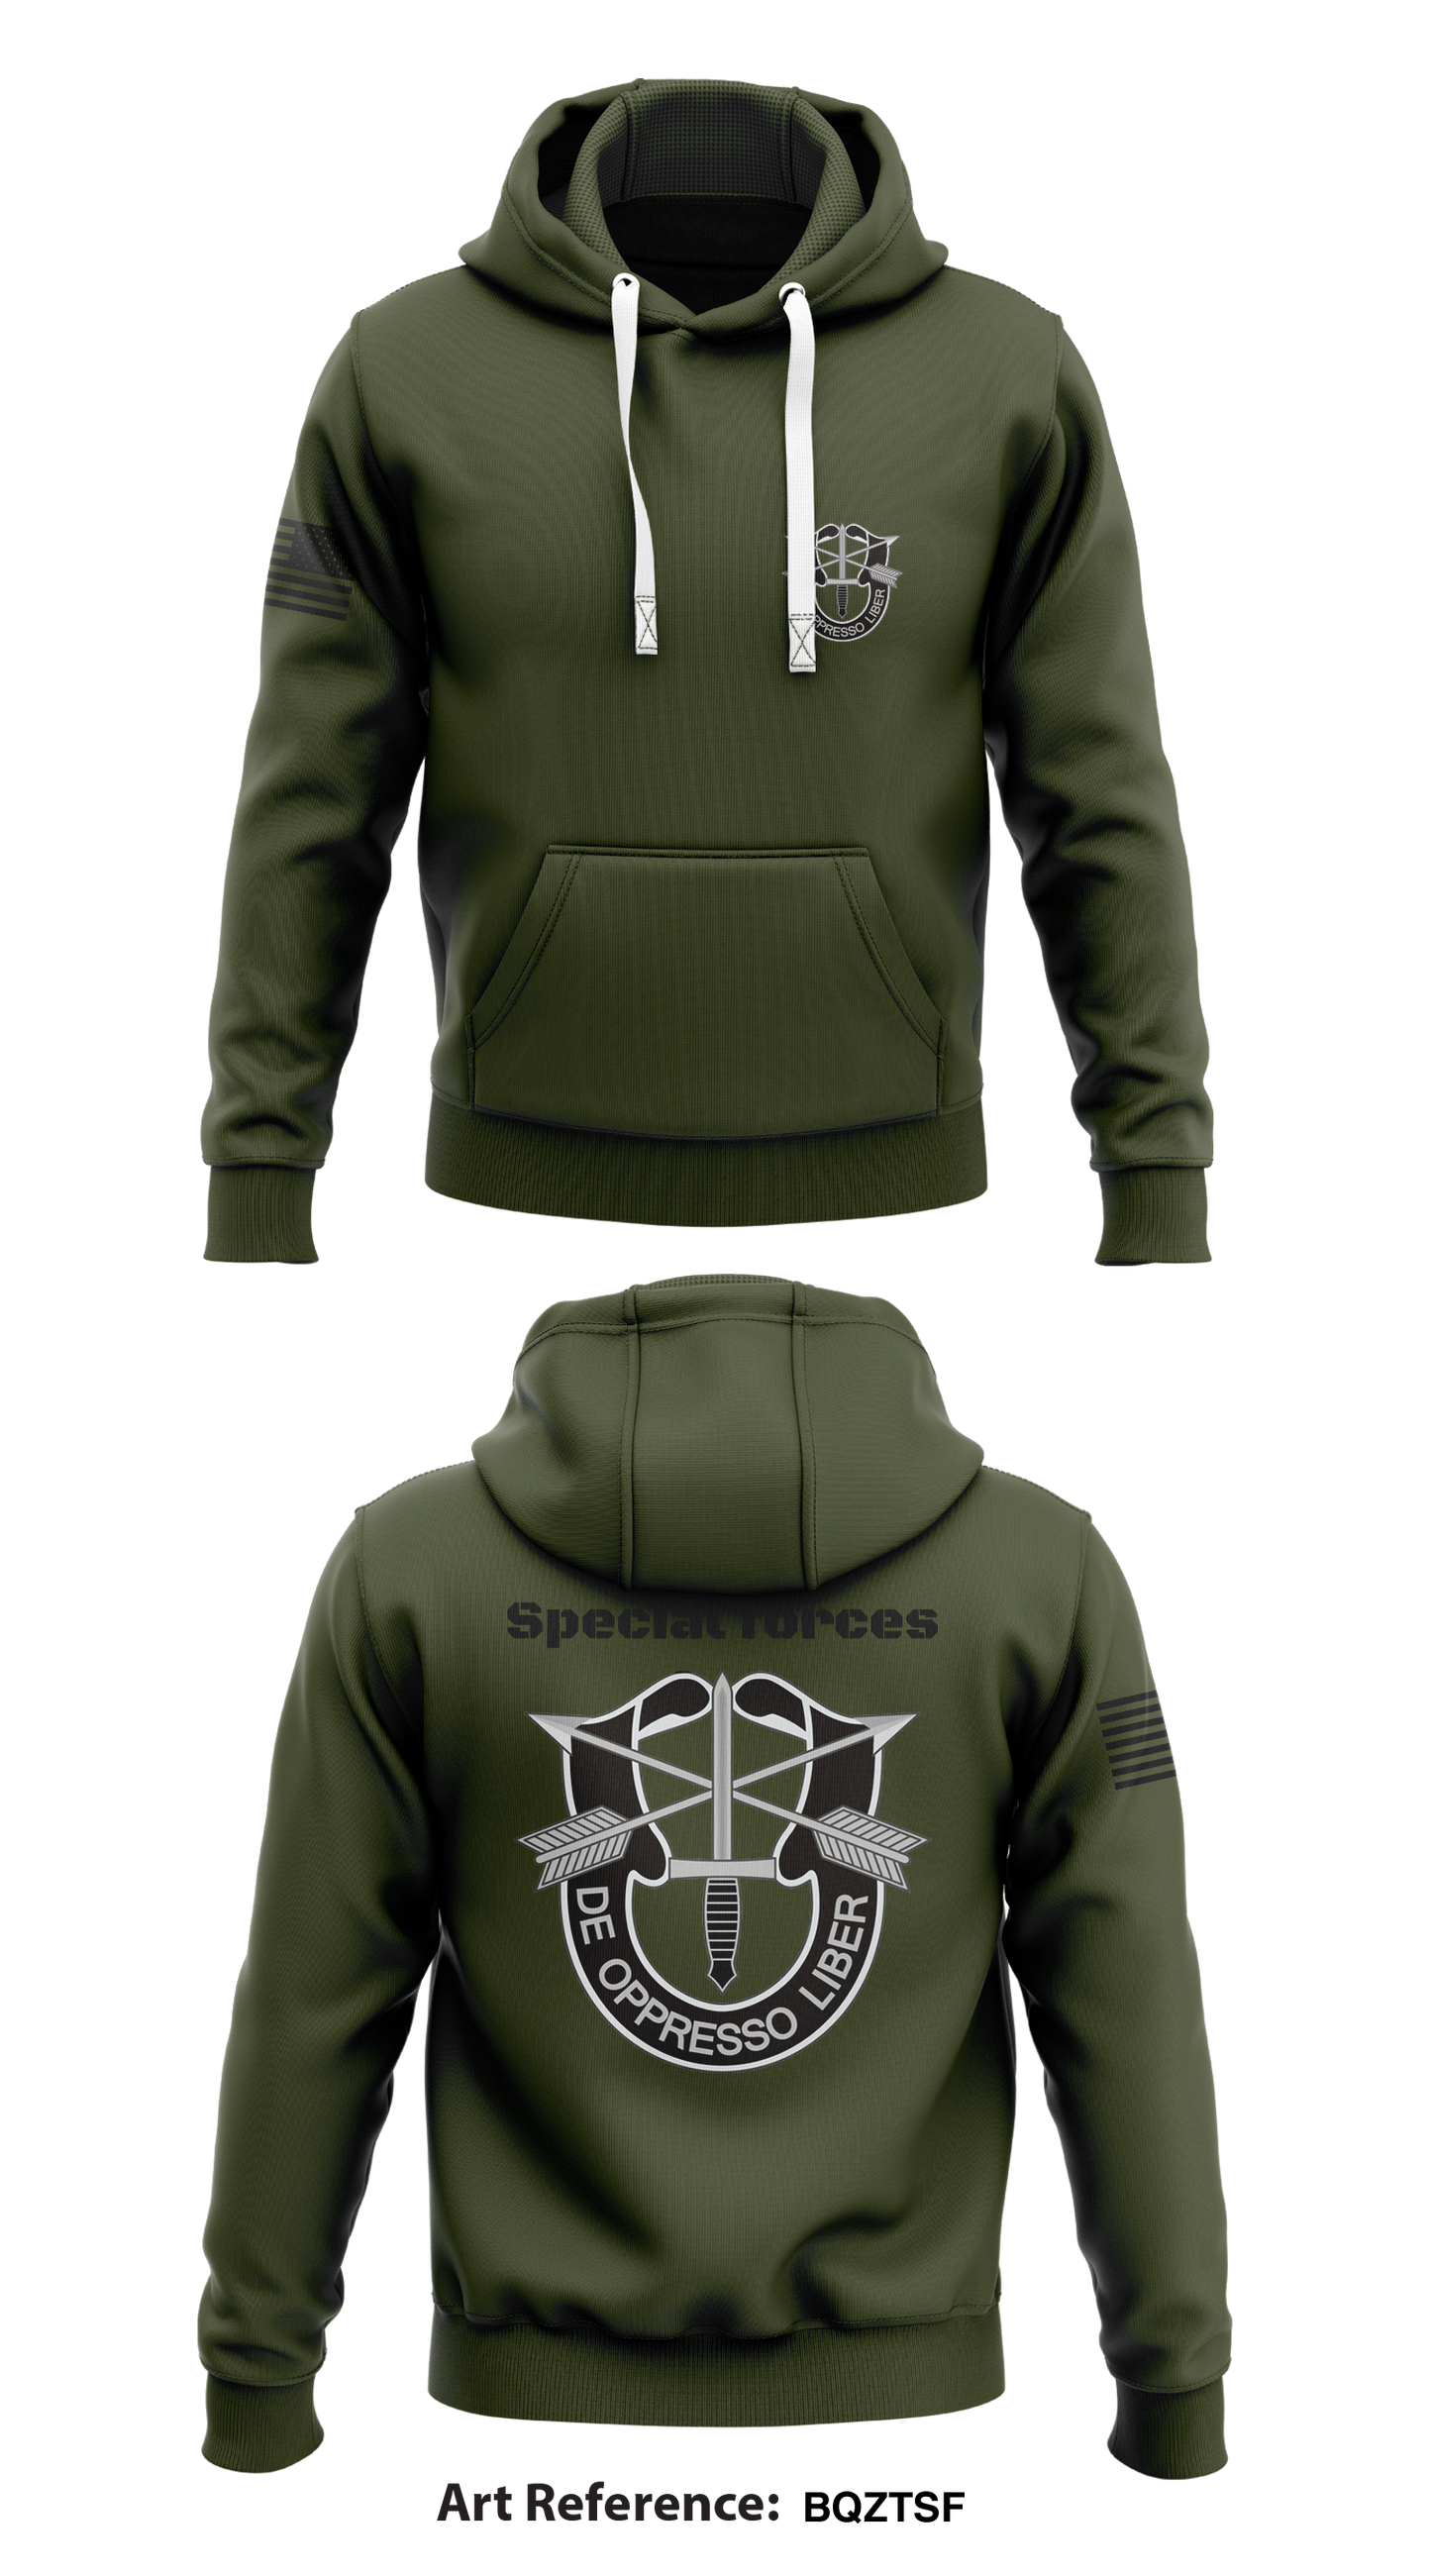 Special forces  Store 1  Core Men's Hooded Performance Sweatshirt - bqztsf